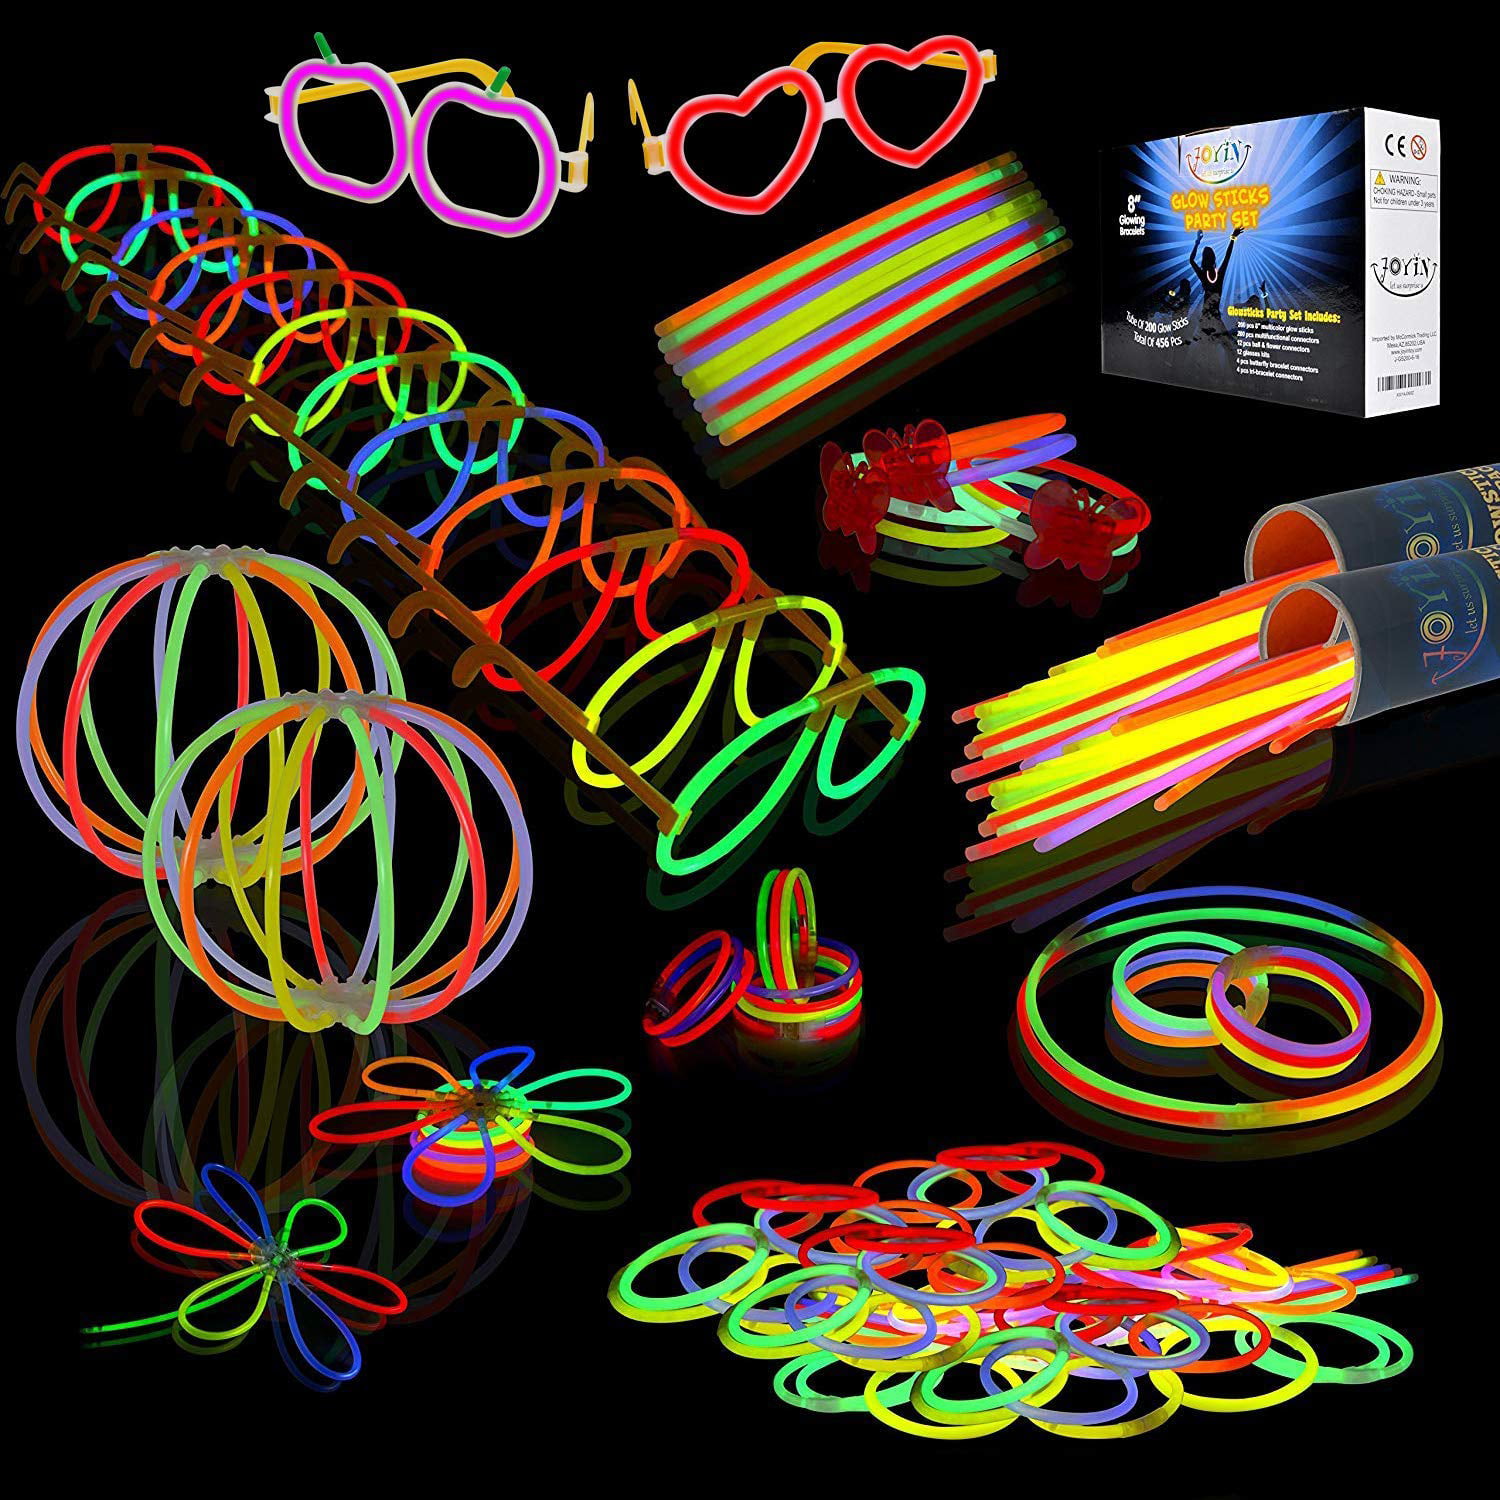 40 Count Glow Sticks Bracelets Glows In The Dark Multi Color With Connectors 8" 